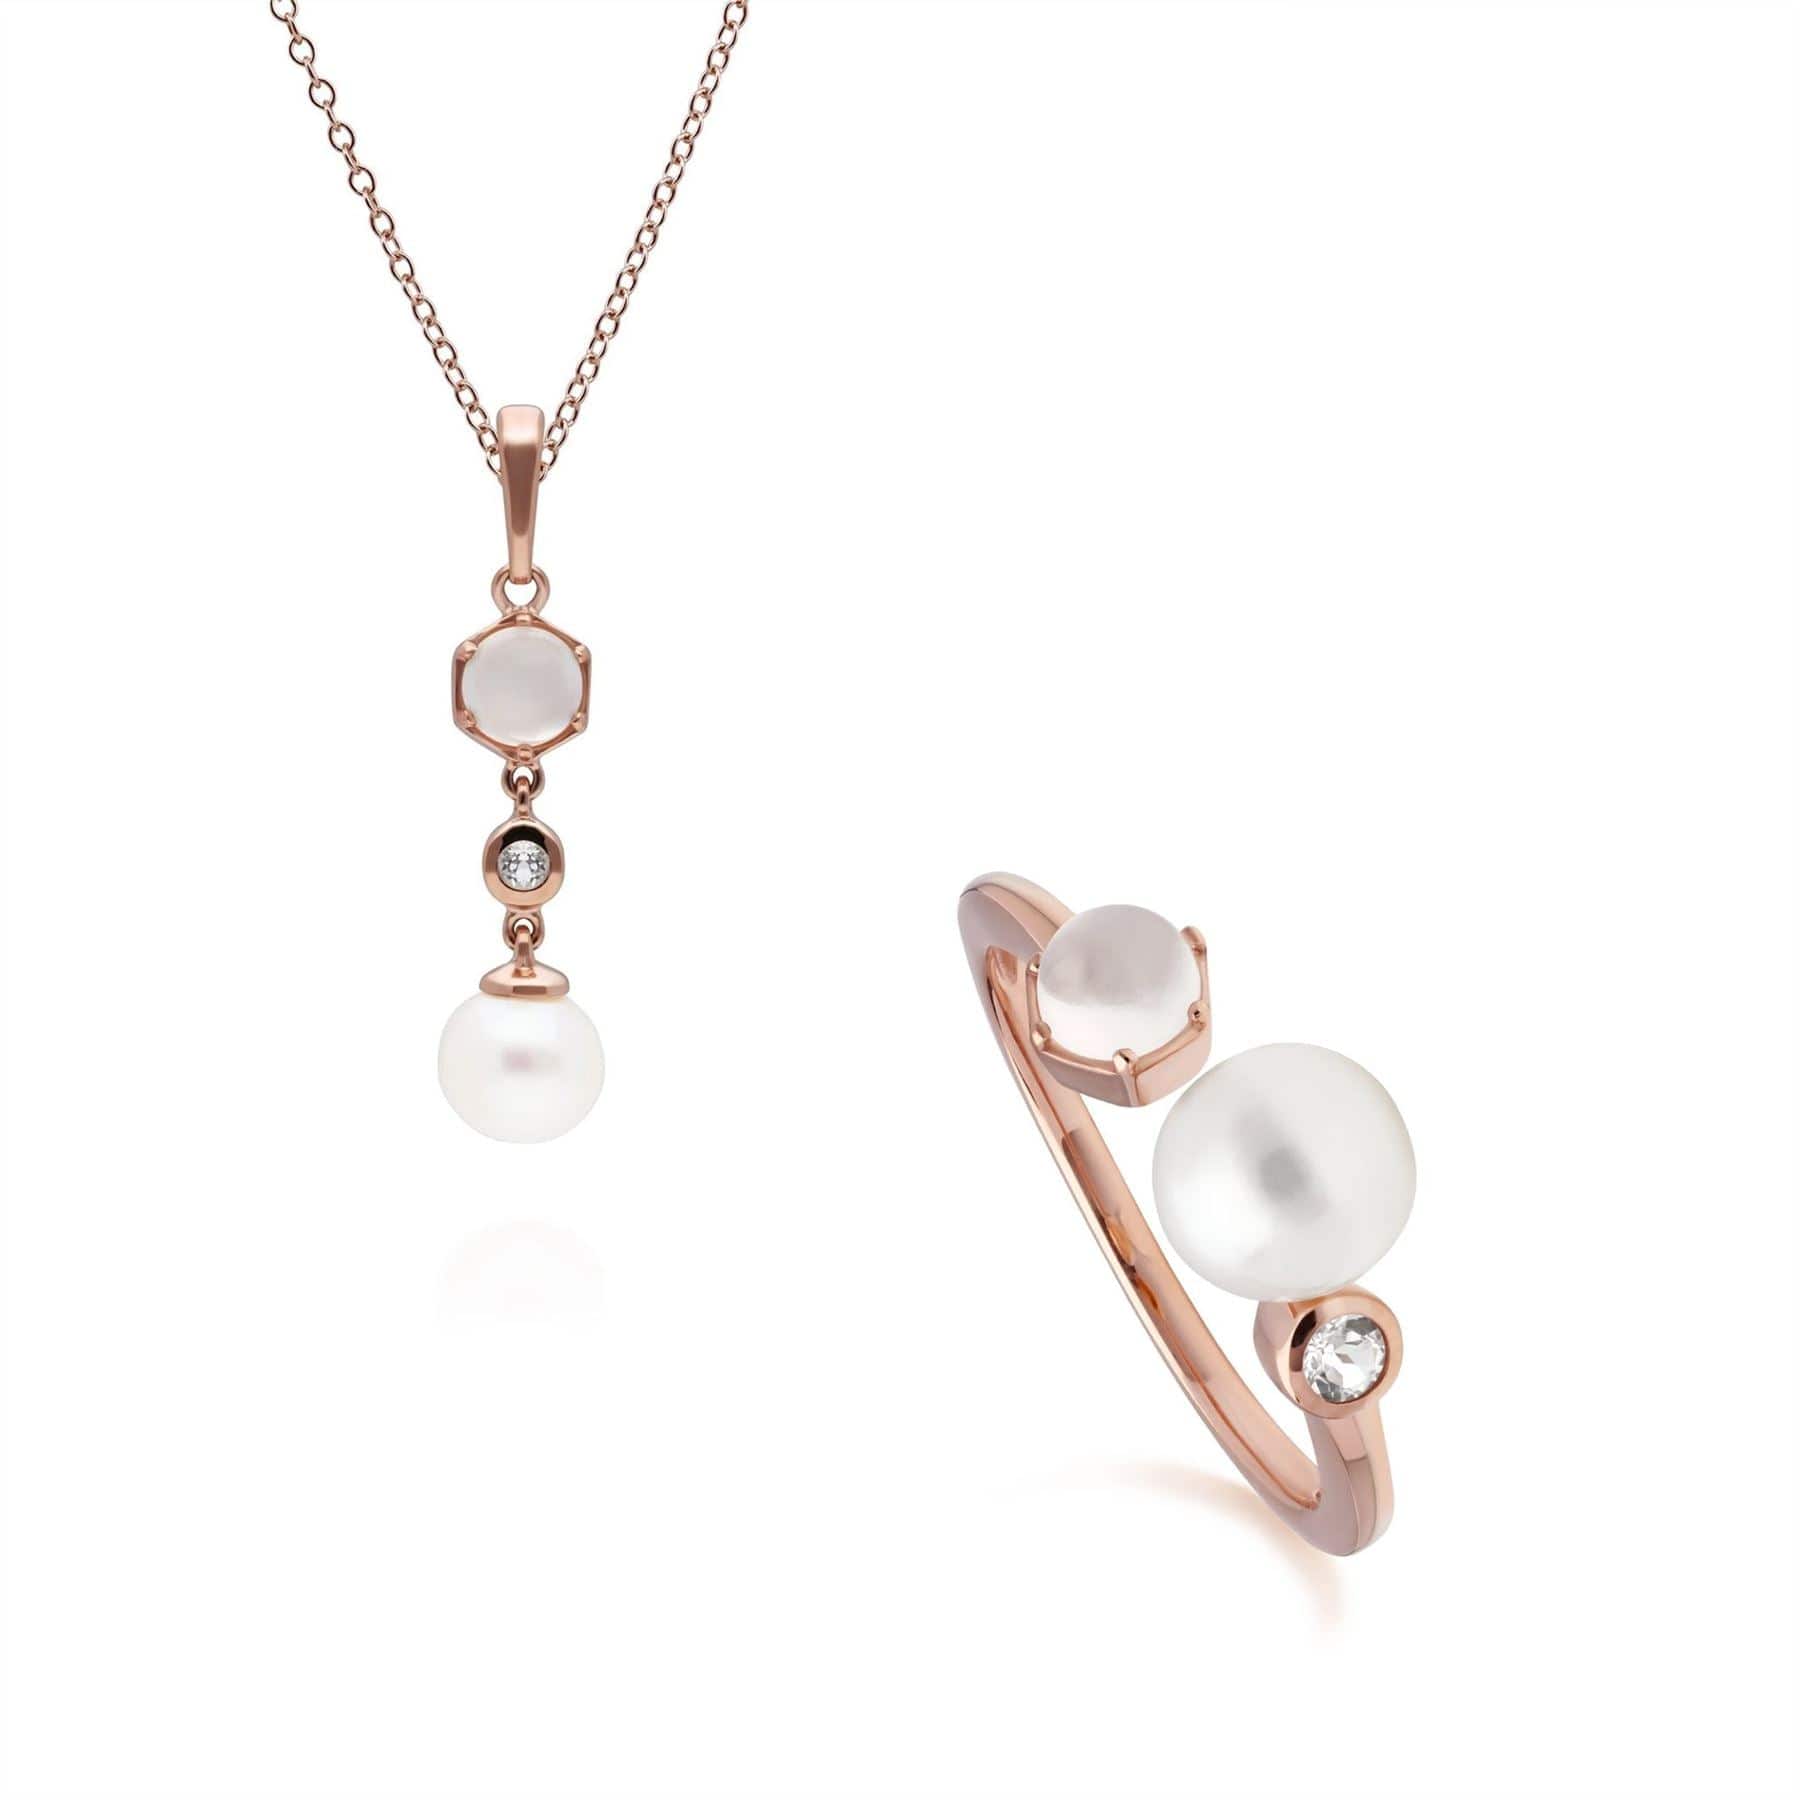 270P030702925-270R059302925 Modern Pearl, Moonstone & Topaz Pendant & Ring Set in Rose Gold Plated Silver 1